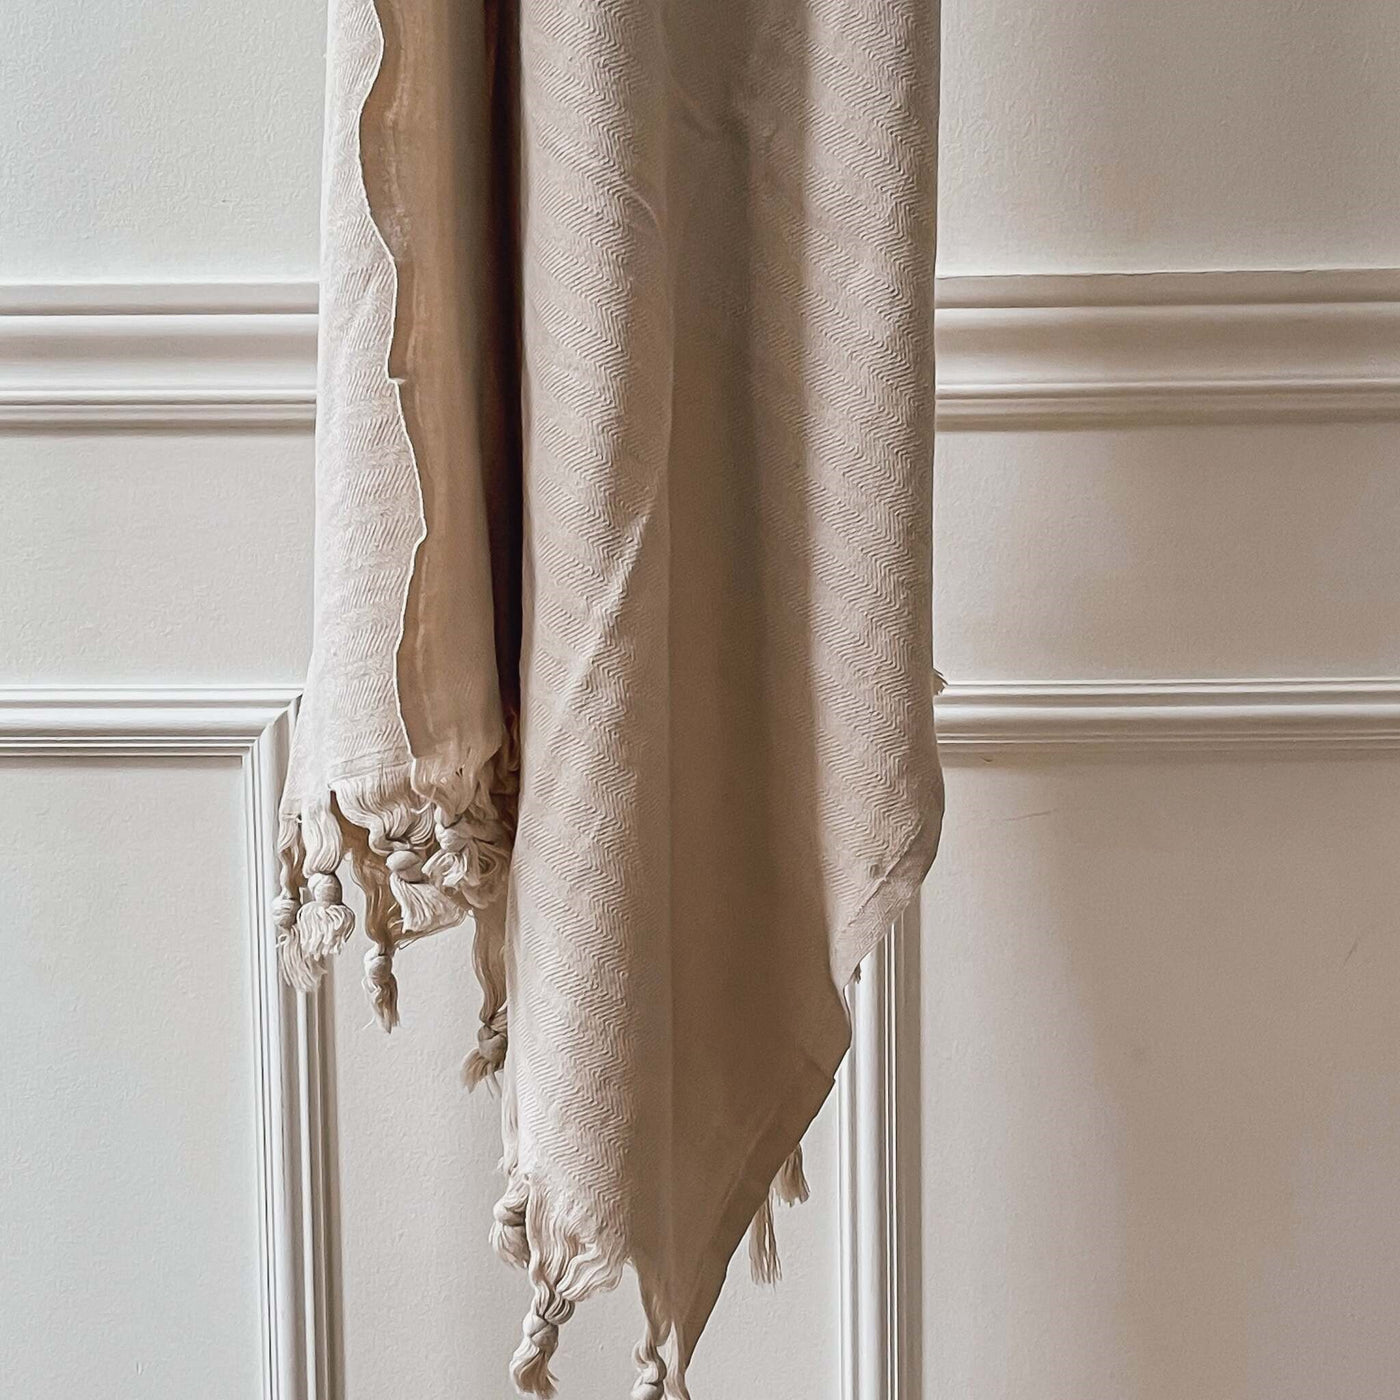 Turkish Hand Towel: Made from the finest 100% Turkish cotton with knotted fringe. Color: Oat · Size: 41"x23" · Brand: House of Jude · SKU: HDT003 · Shop online at Avalon Willow Home